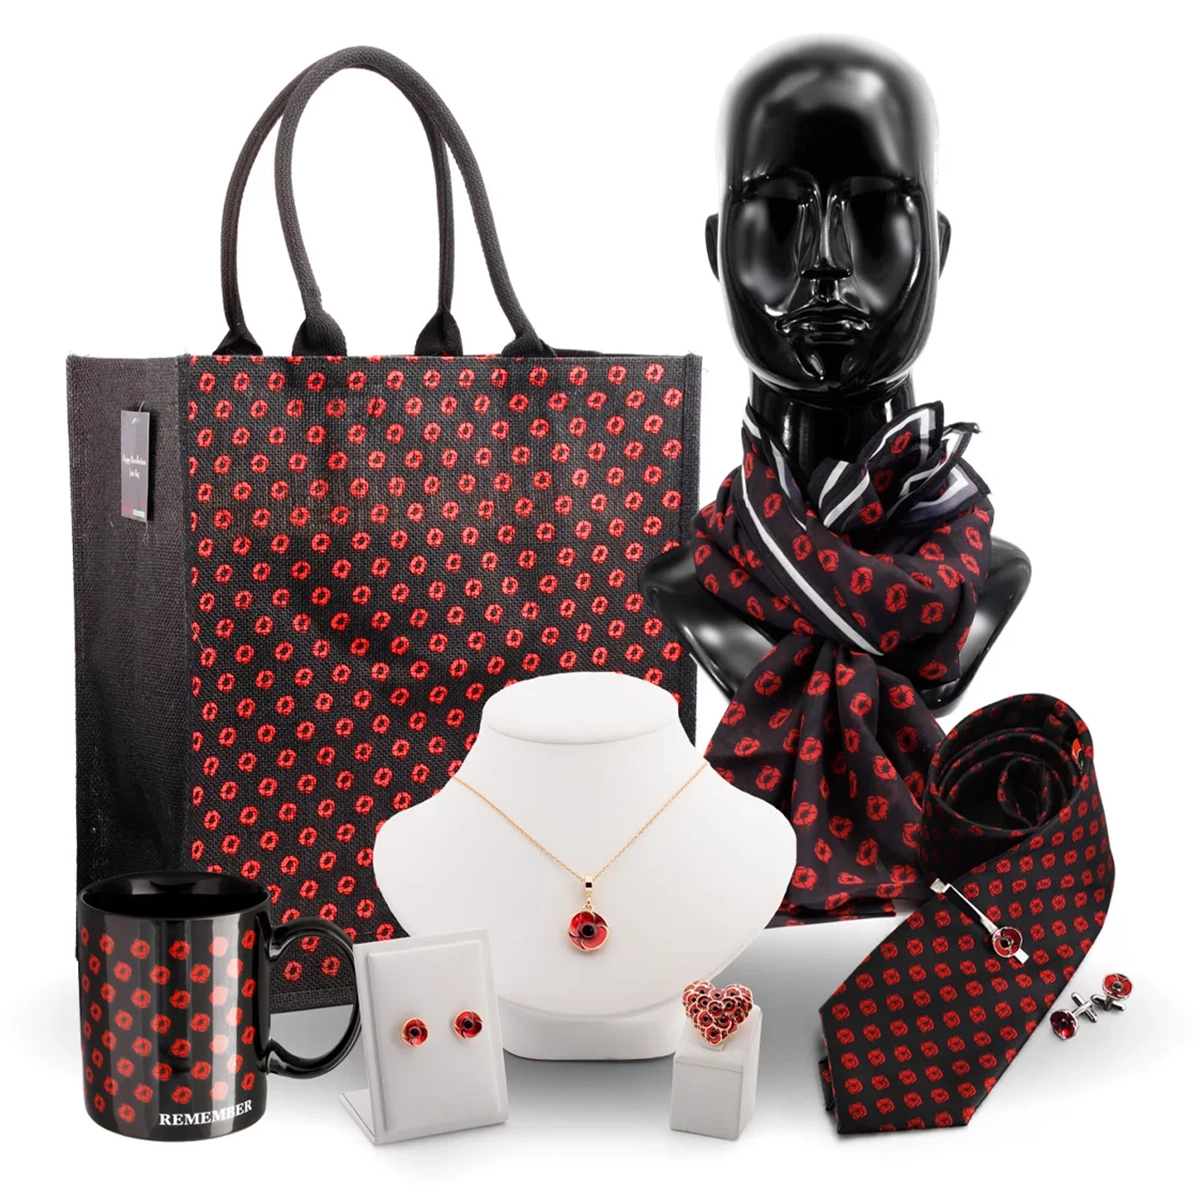 The Poppy Collection featuring products from the poppy collection available on Military Shop Remembrance Day webpage